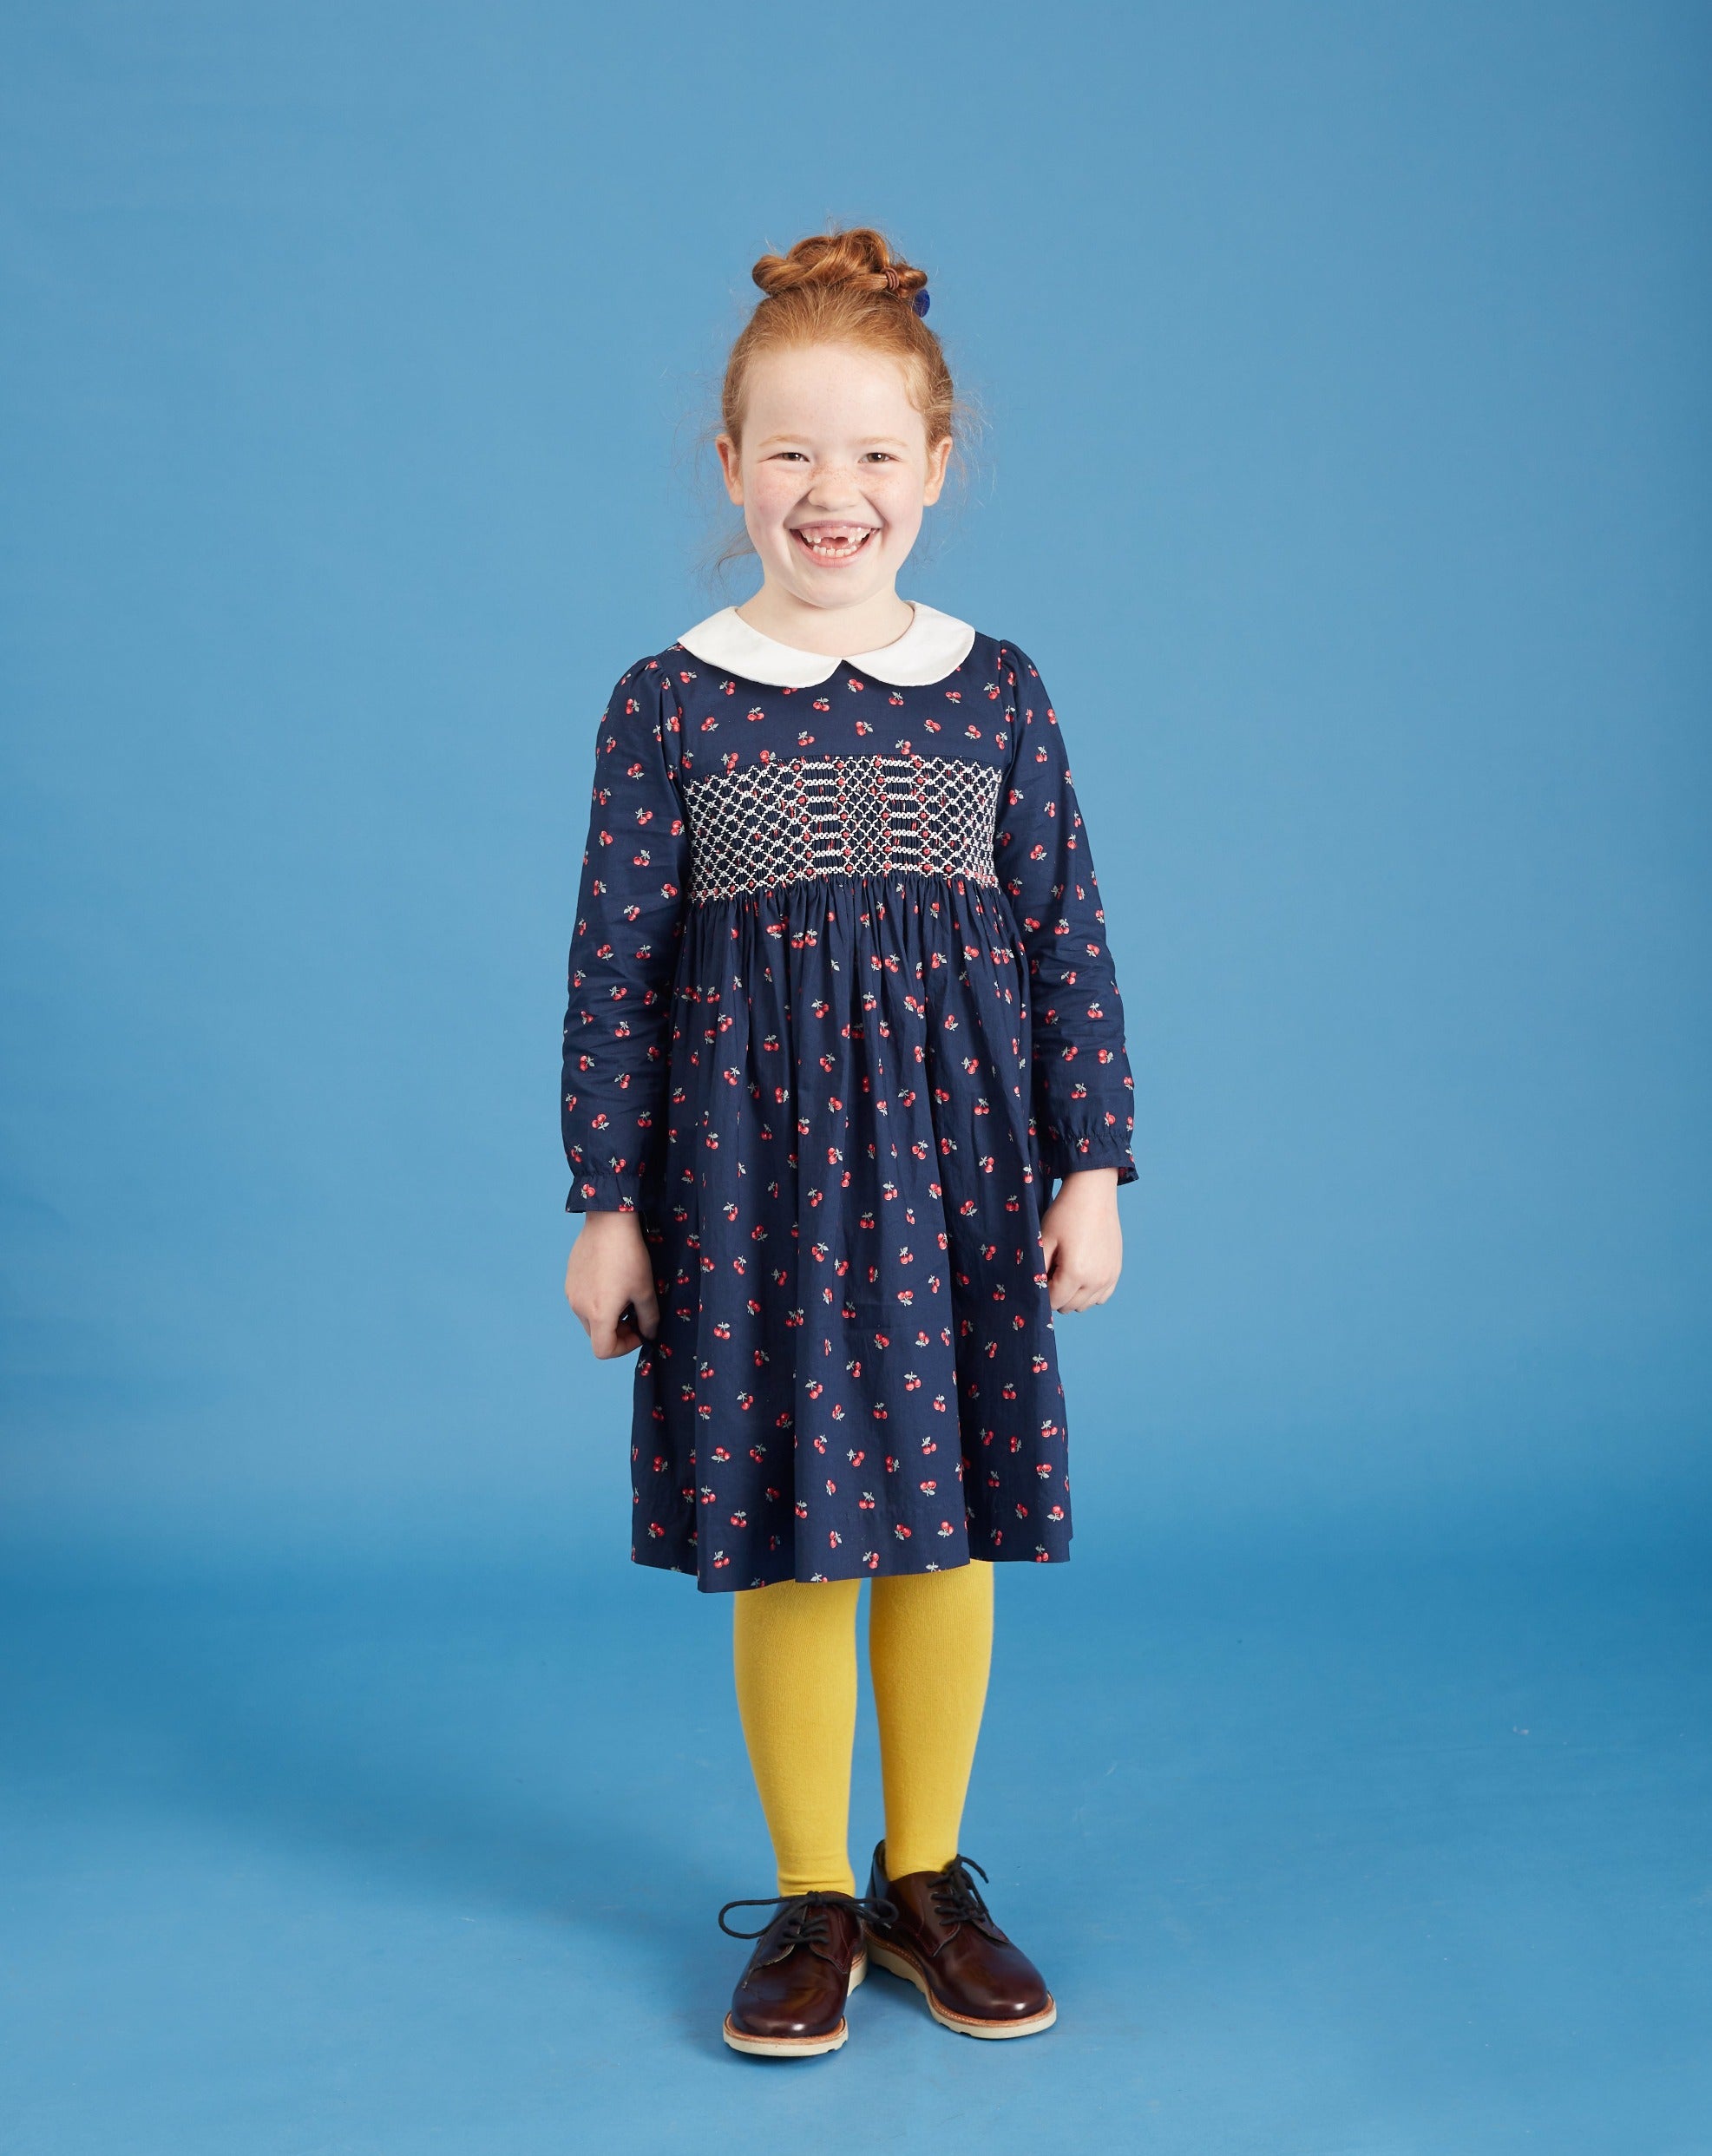 girl in smocked dress, navy with white collar